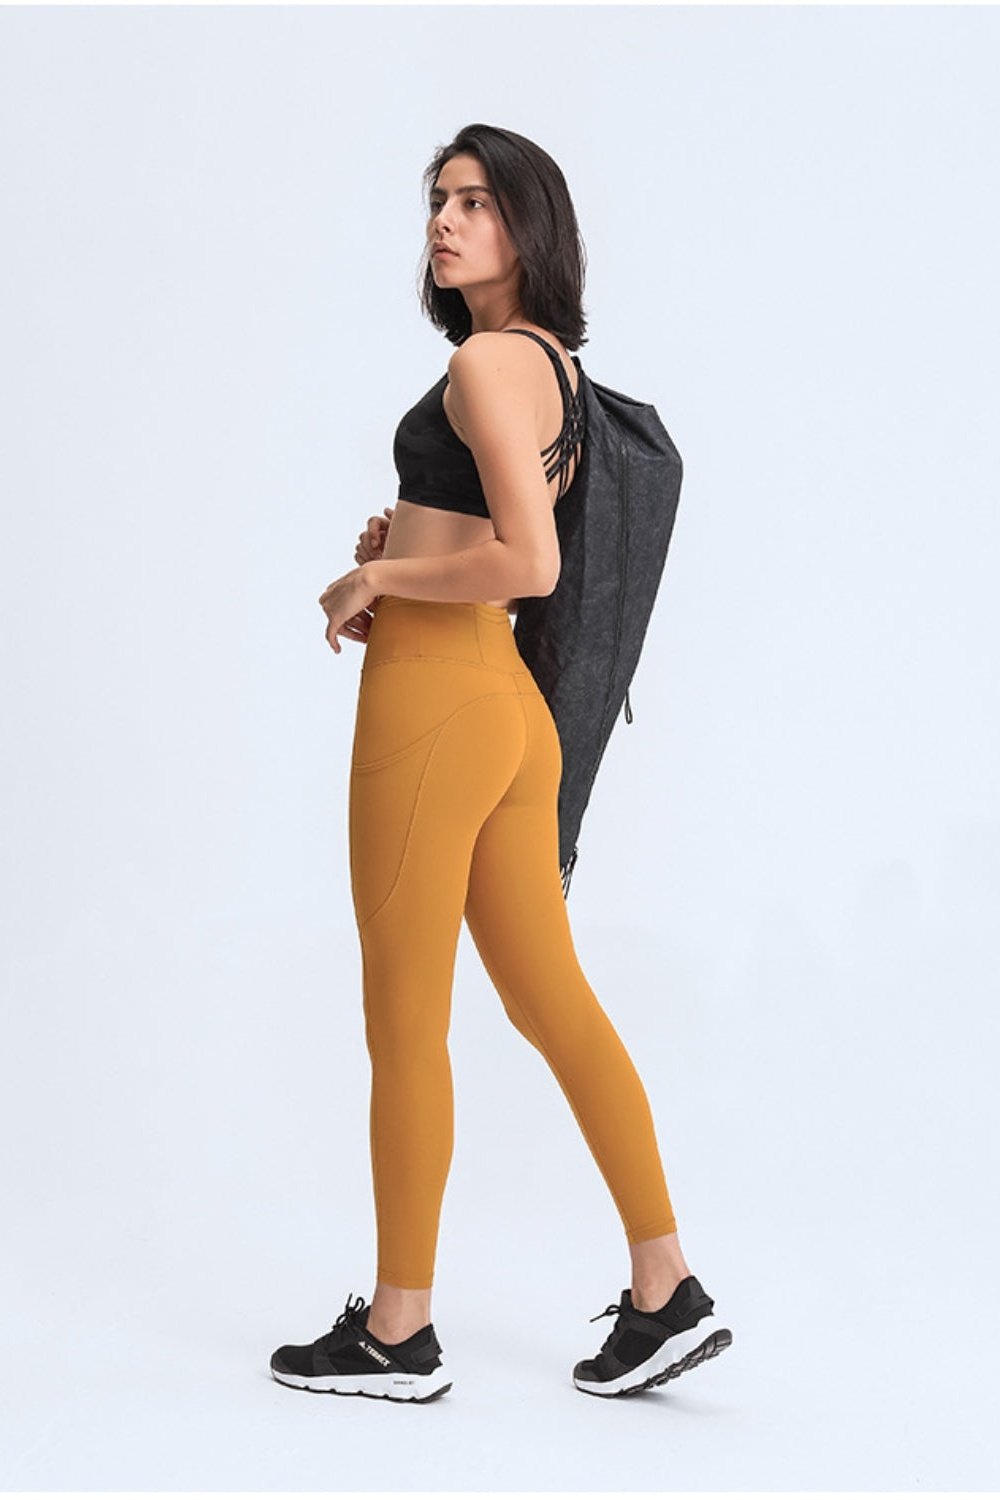 Wide Waistband Leggings with Pockets - Leggings - FITGGINS